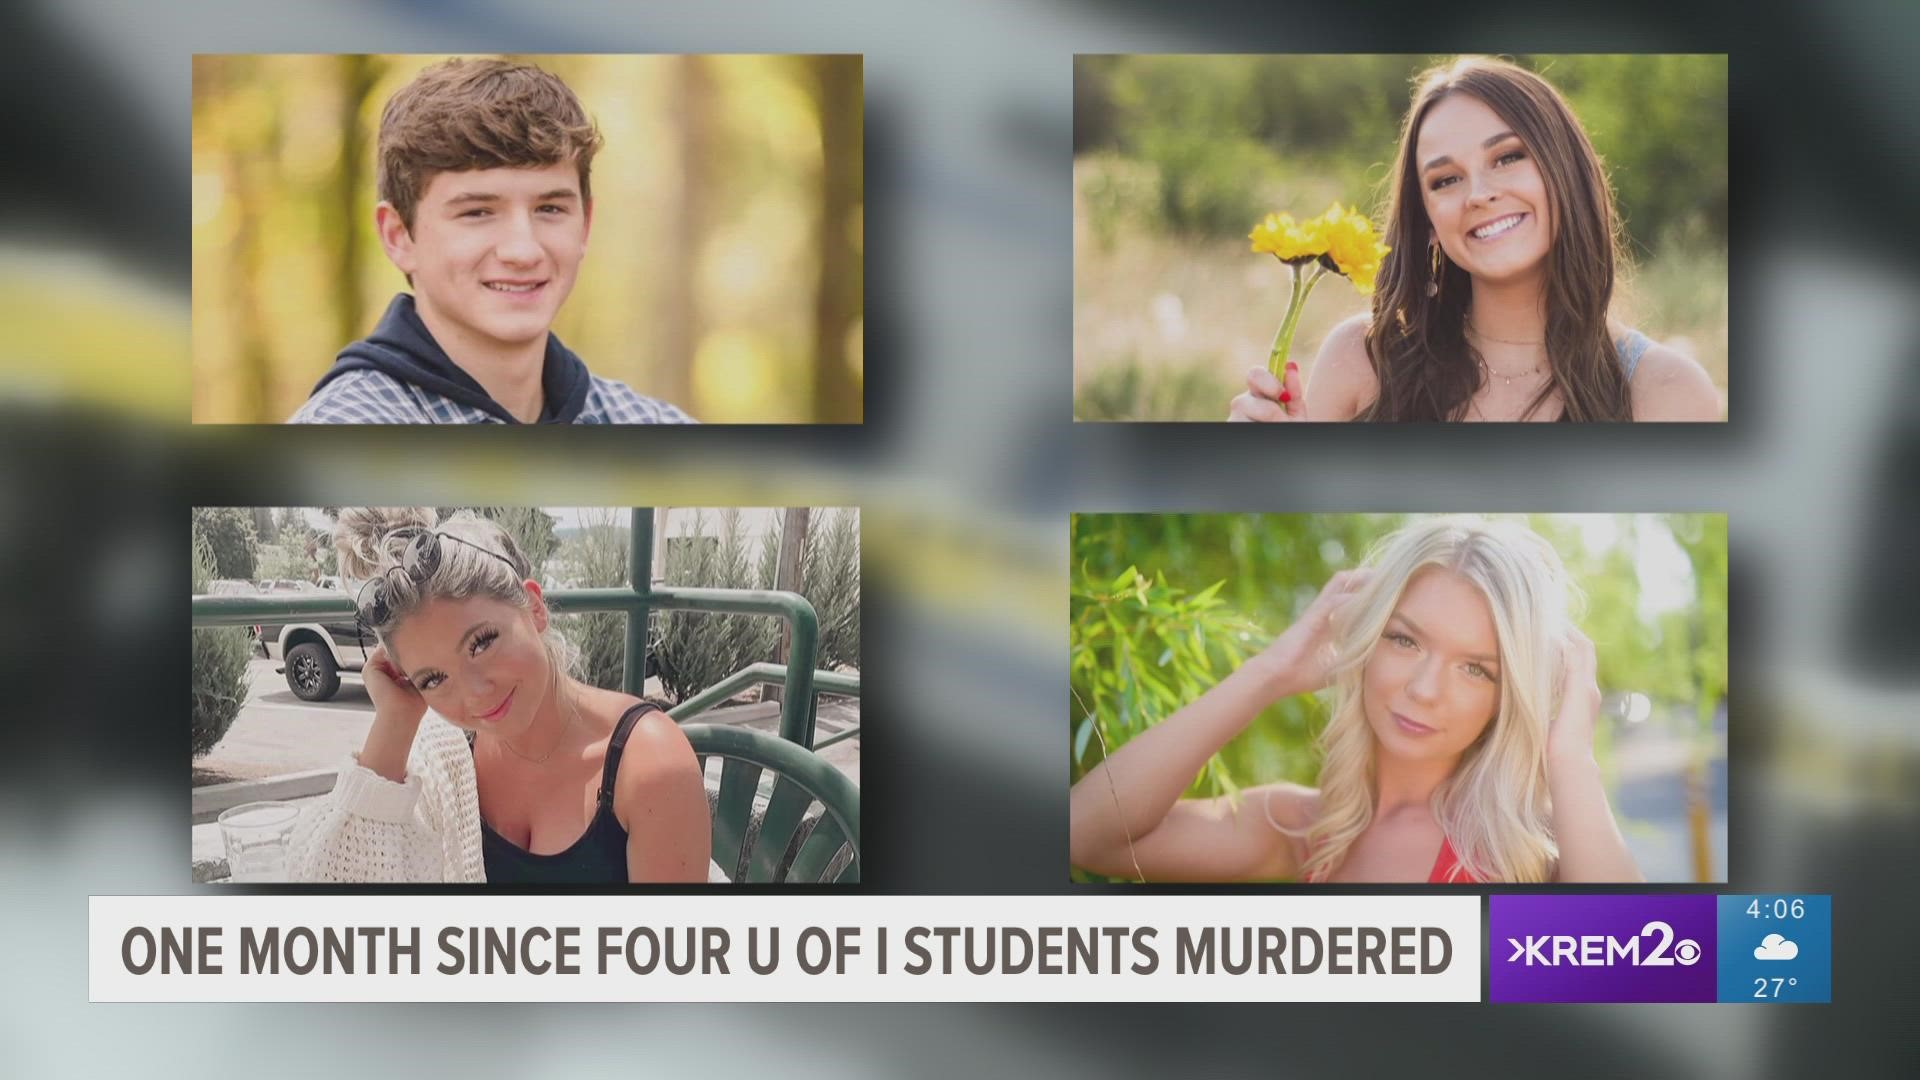 Tuesday marks one month since four U of I students were murdered. One month later, police still have no suspect and are working to misinformation from spreading.